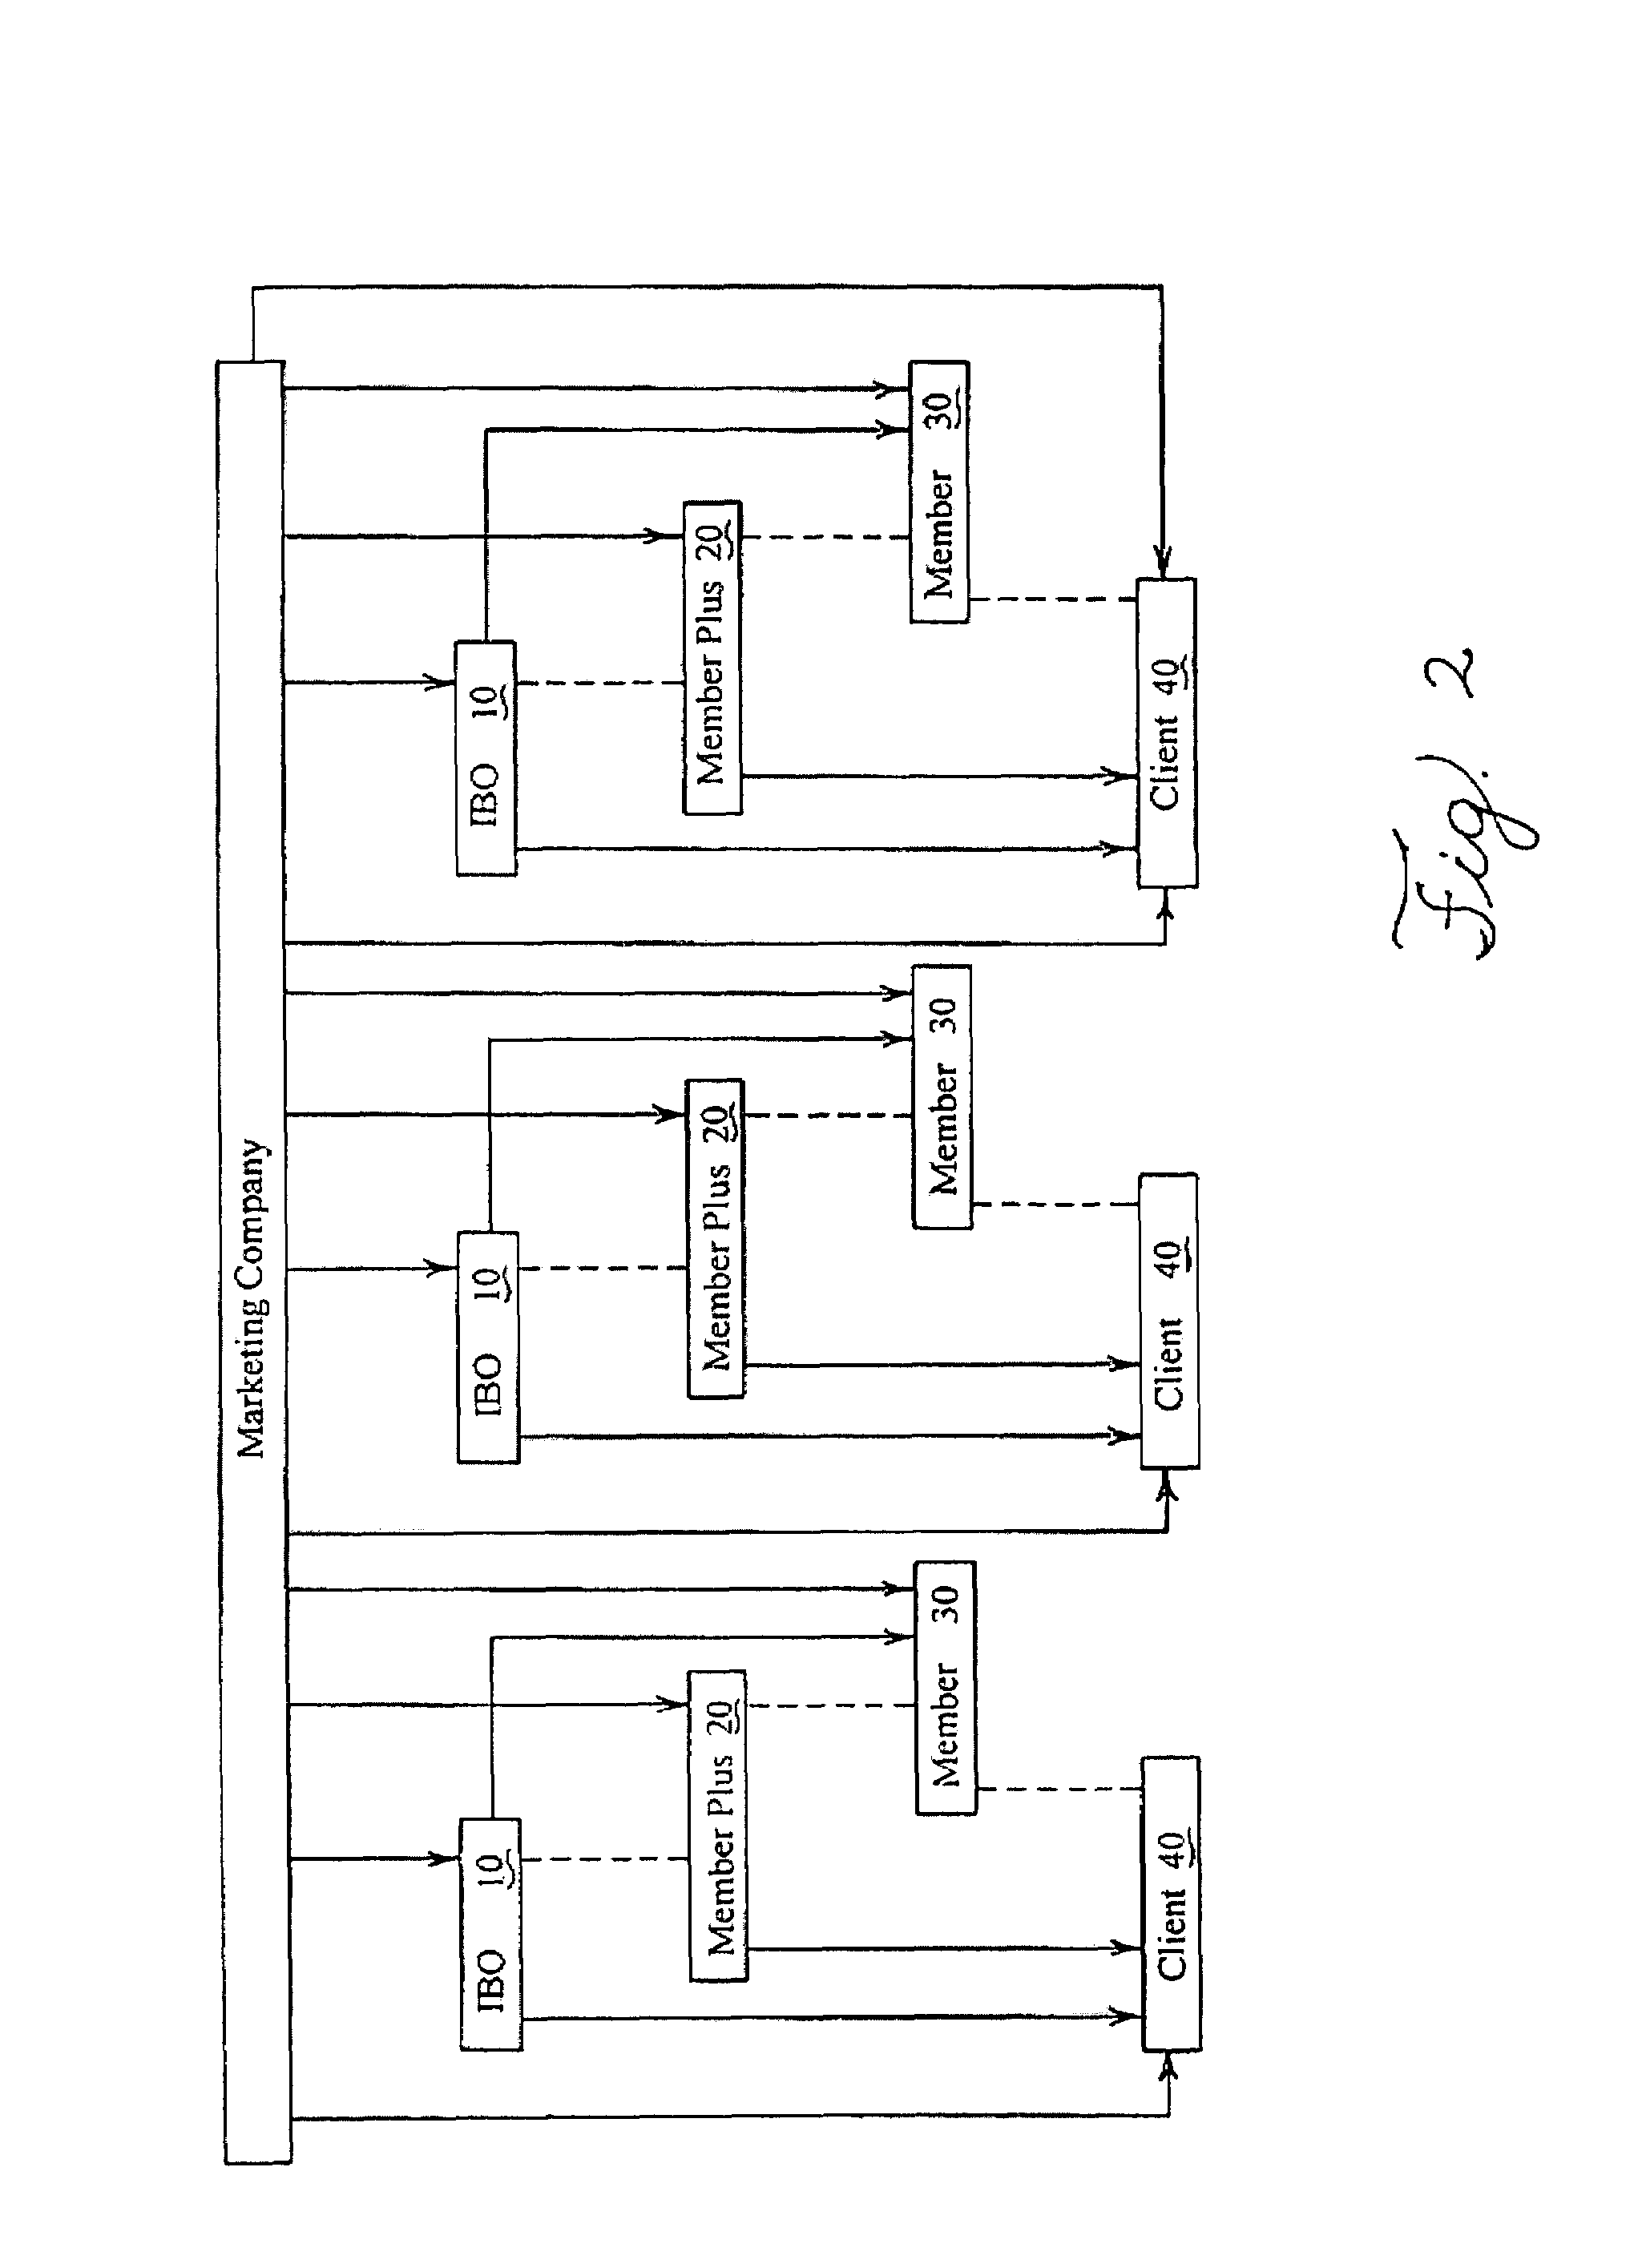 System and method for managing recurring orders in a computer network